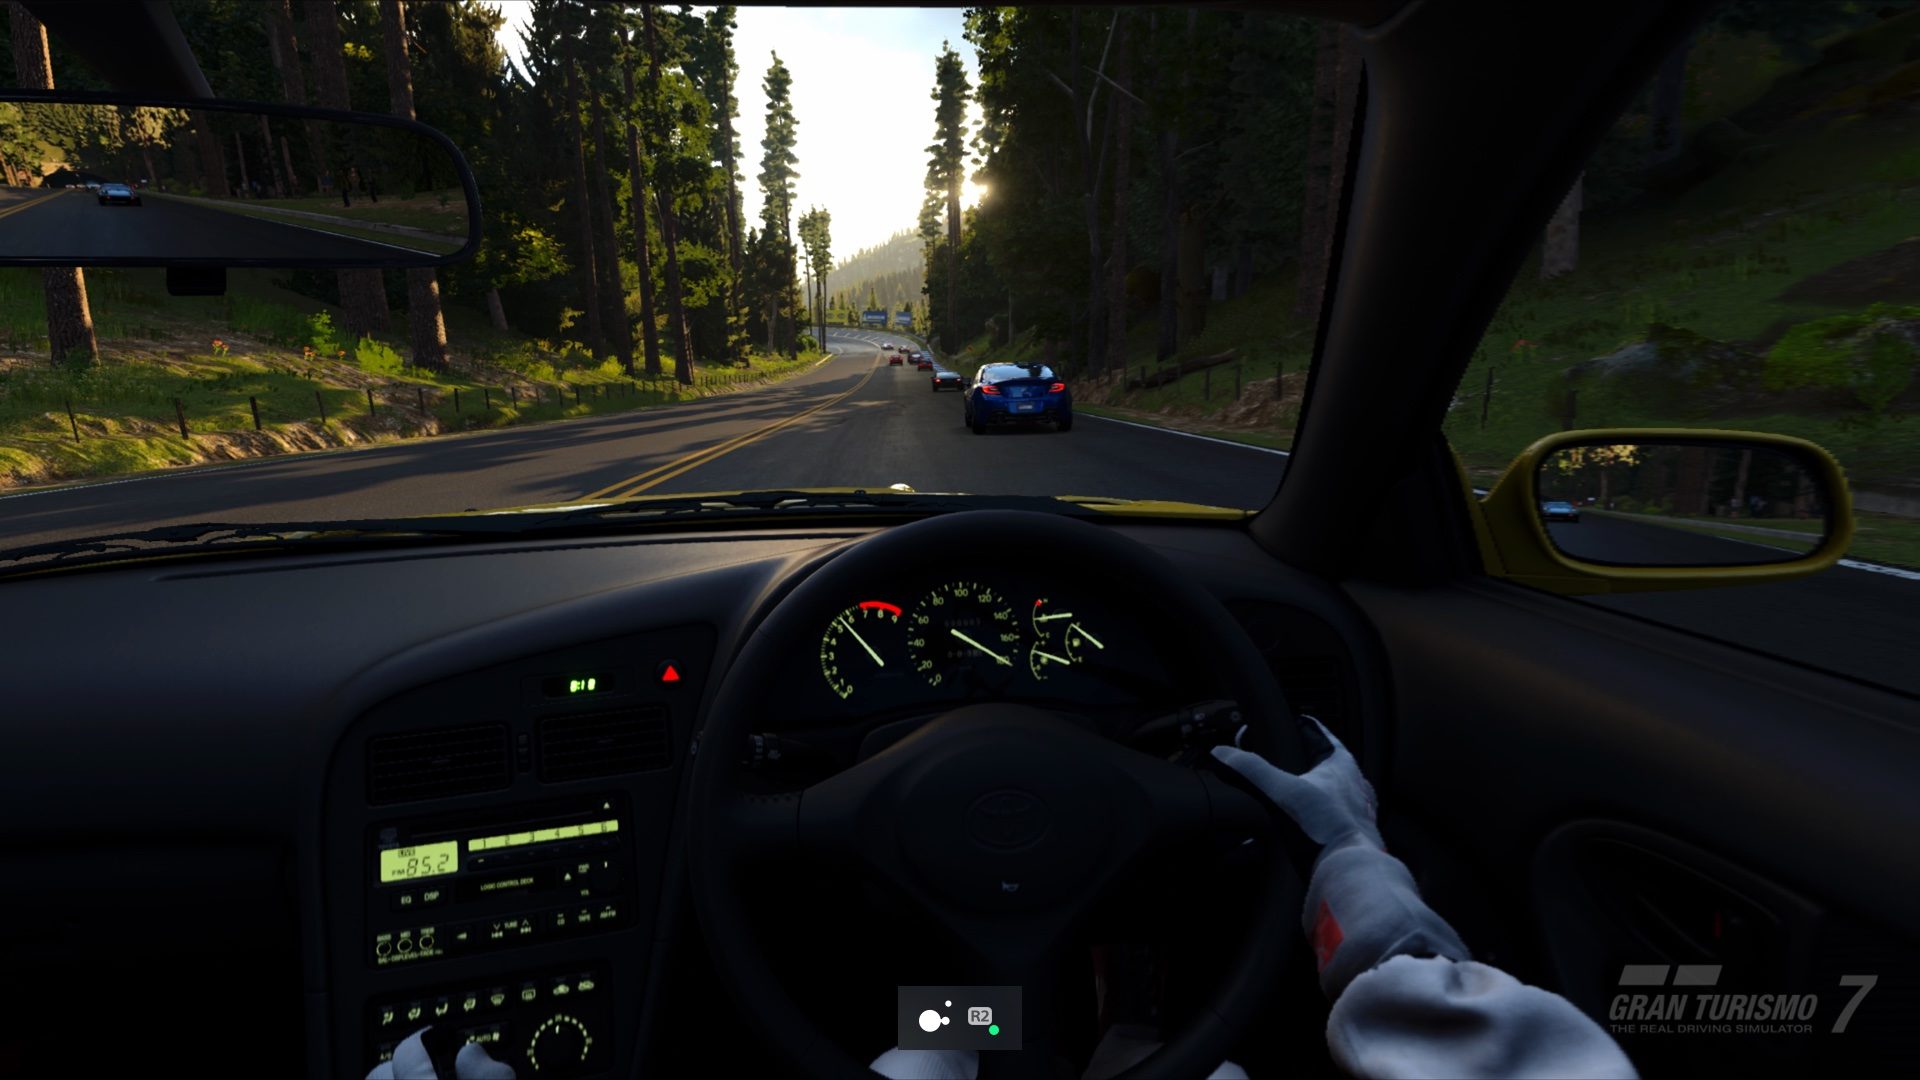 Gran Turismo 7 PS5 screenshot showing the toggle mode enabled for the “R2” button on the Access Controller